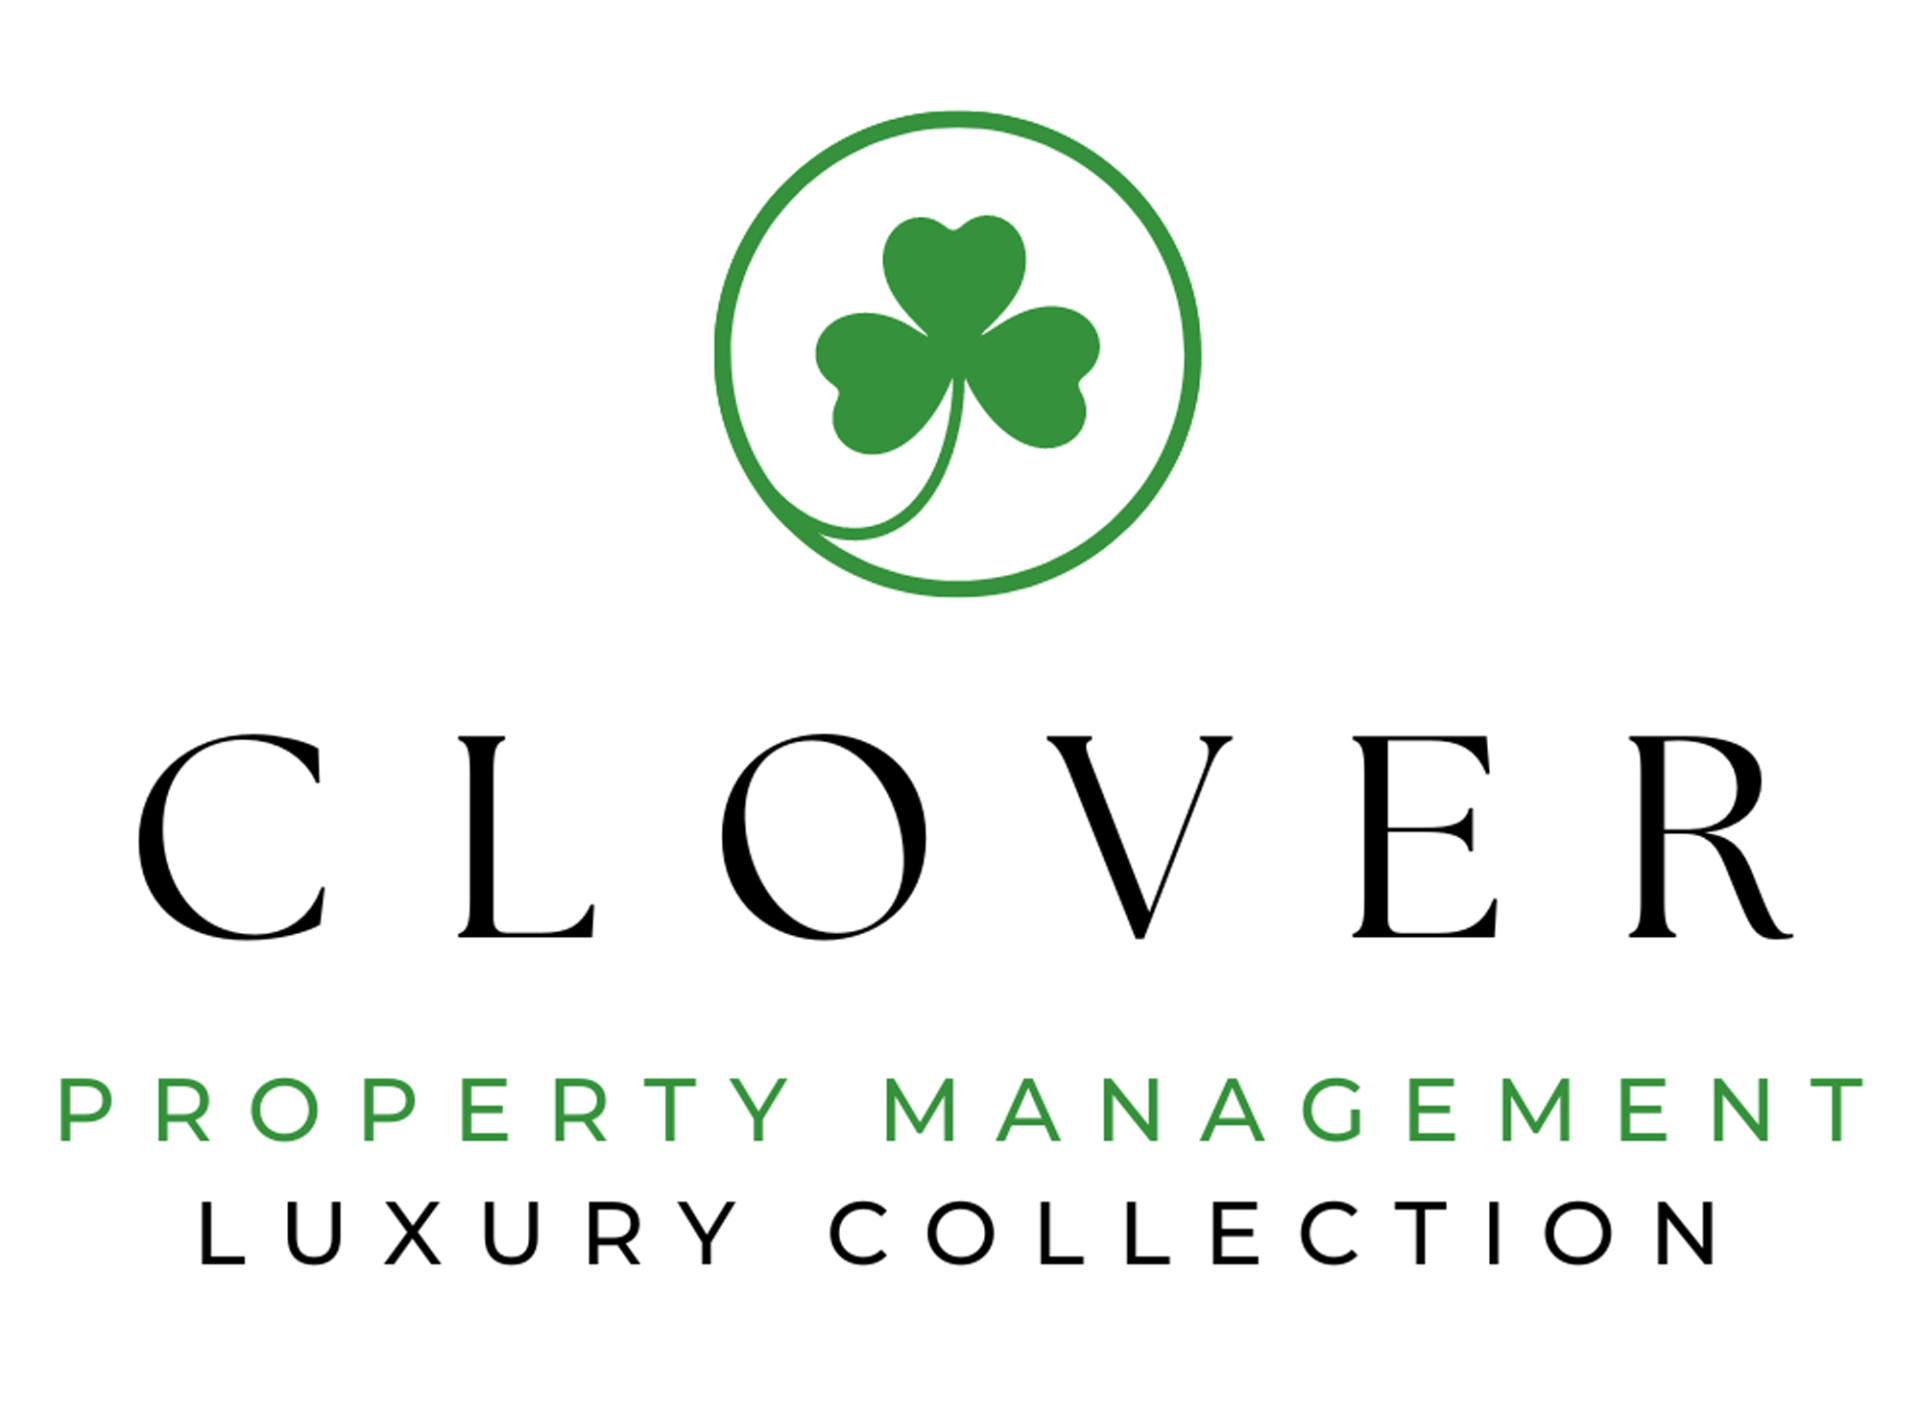 Clover Property Management Company Luxury Collection Logo